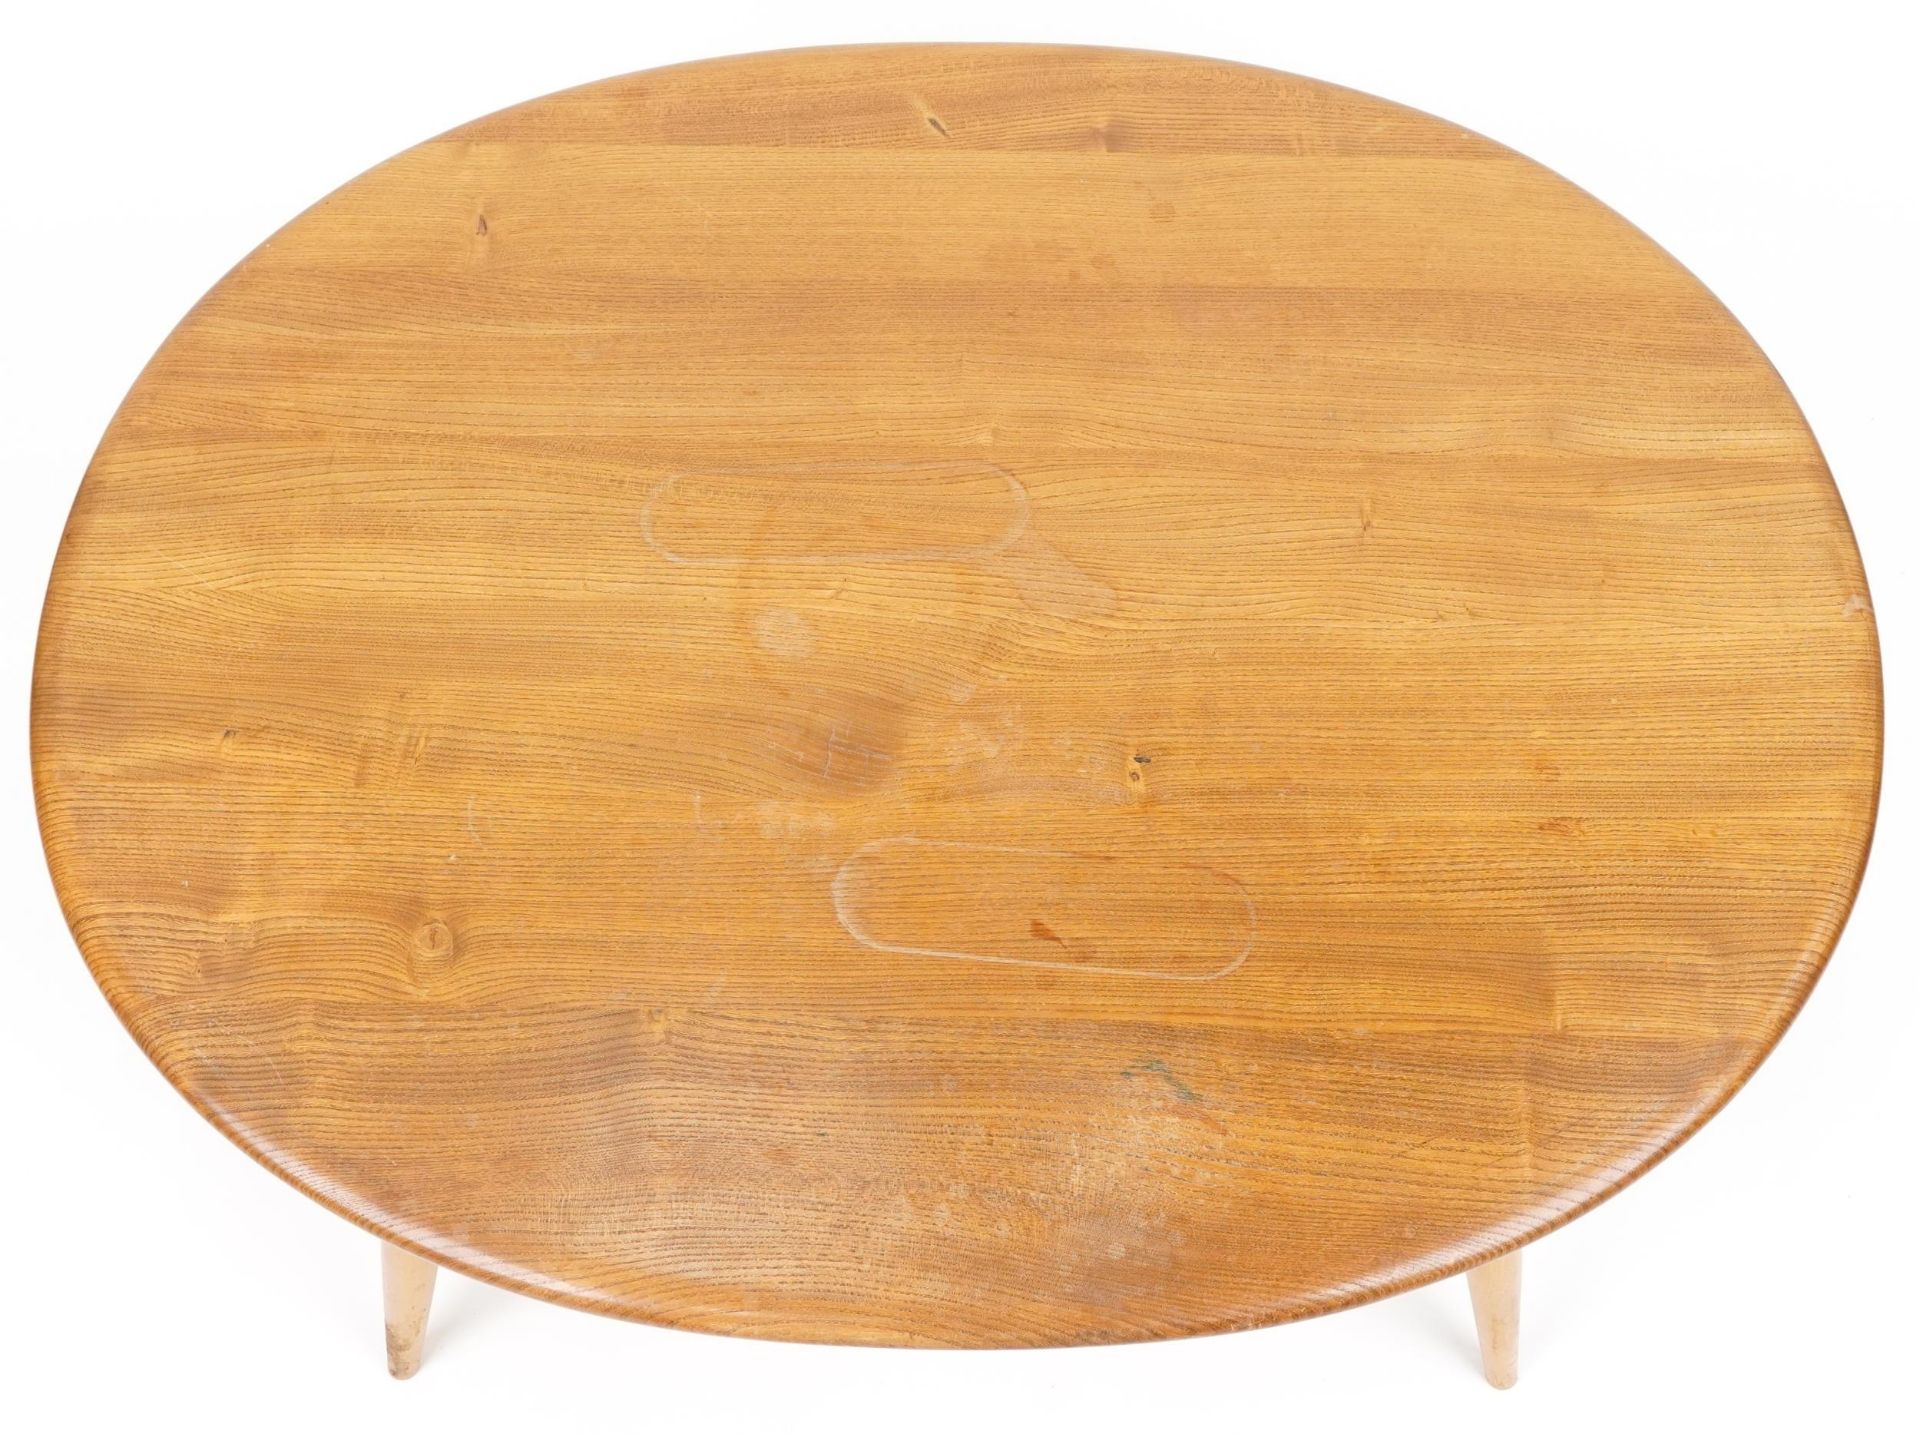 Ercol light elm coffee table with oval top, 44cm H x 99cm W x 82cm D - Image 3 of 5